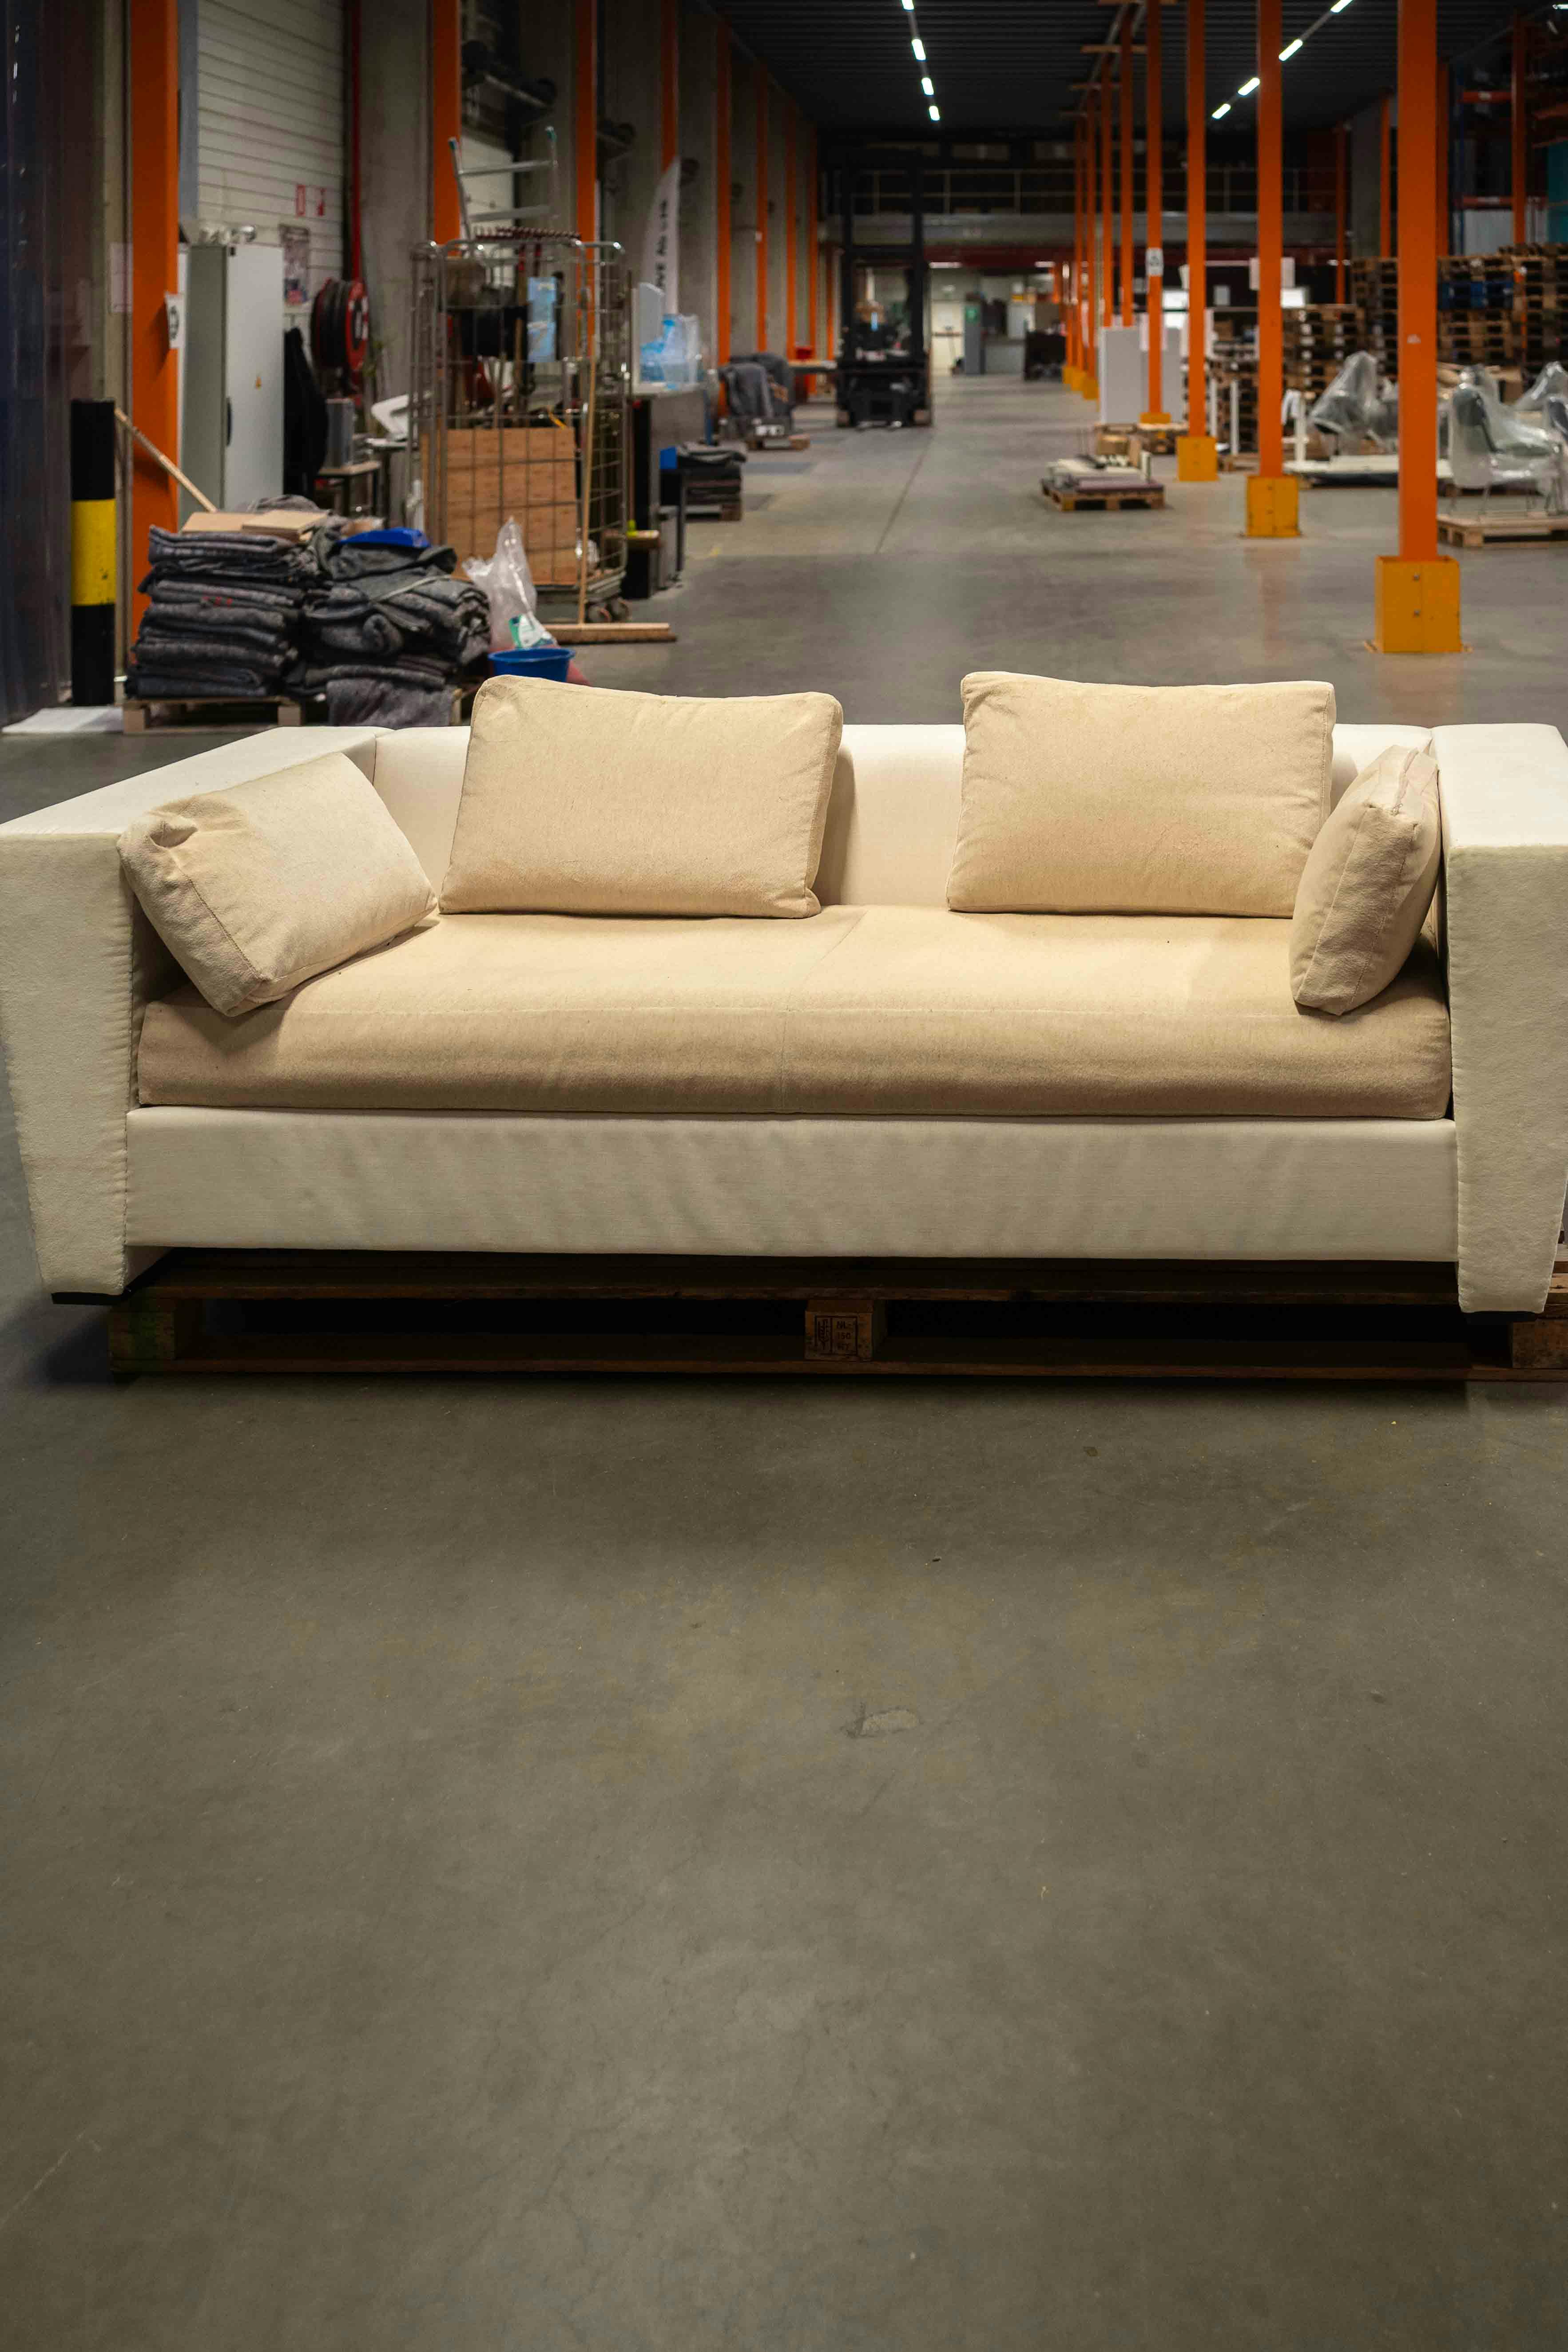 BEFI2310:Straight-couches - Relieve Furniture